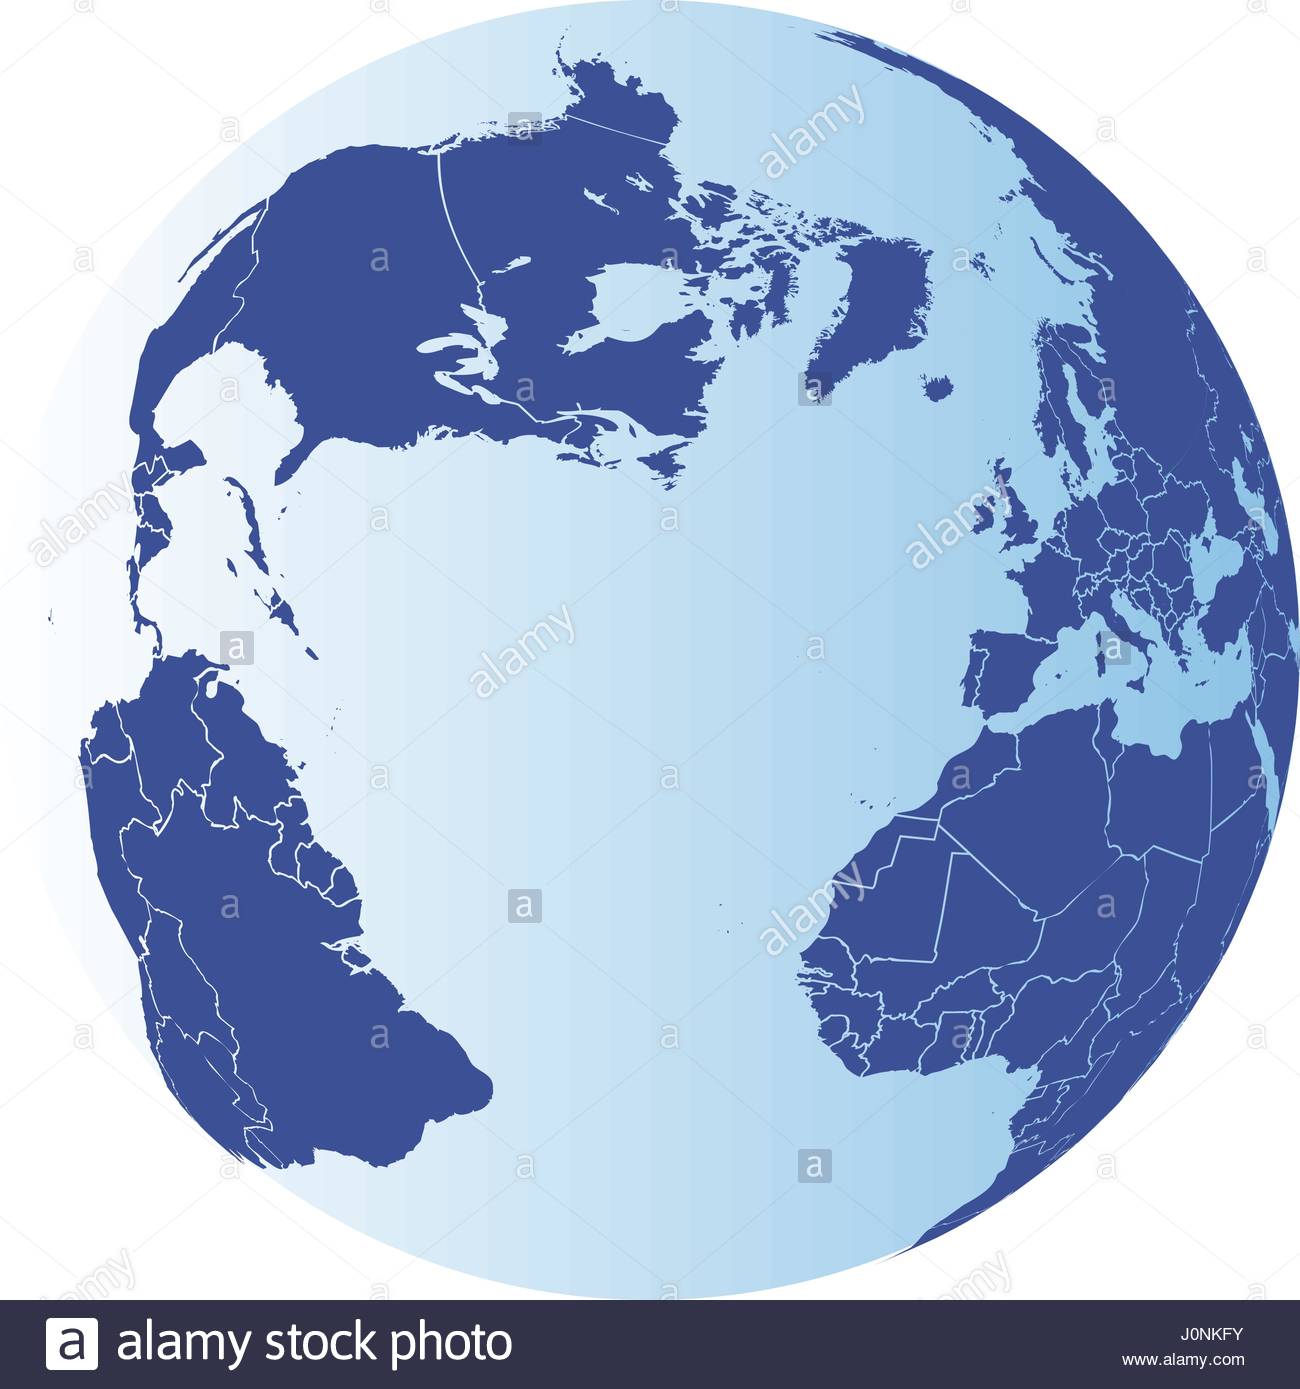 North America South America Europe And Africa Globe Elements Of